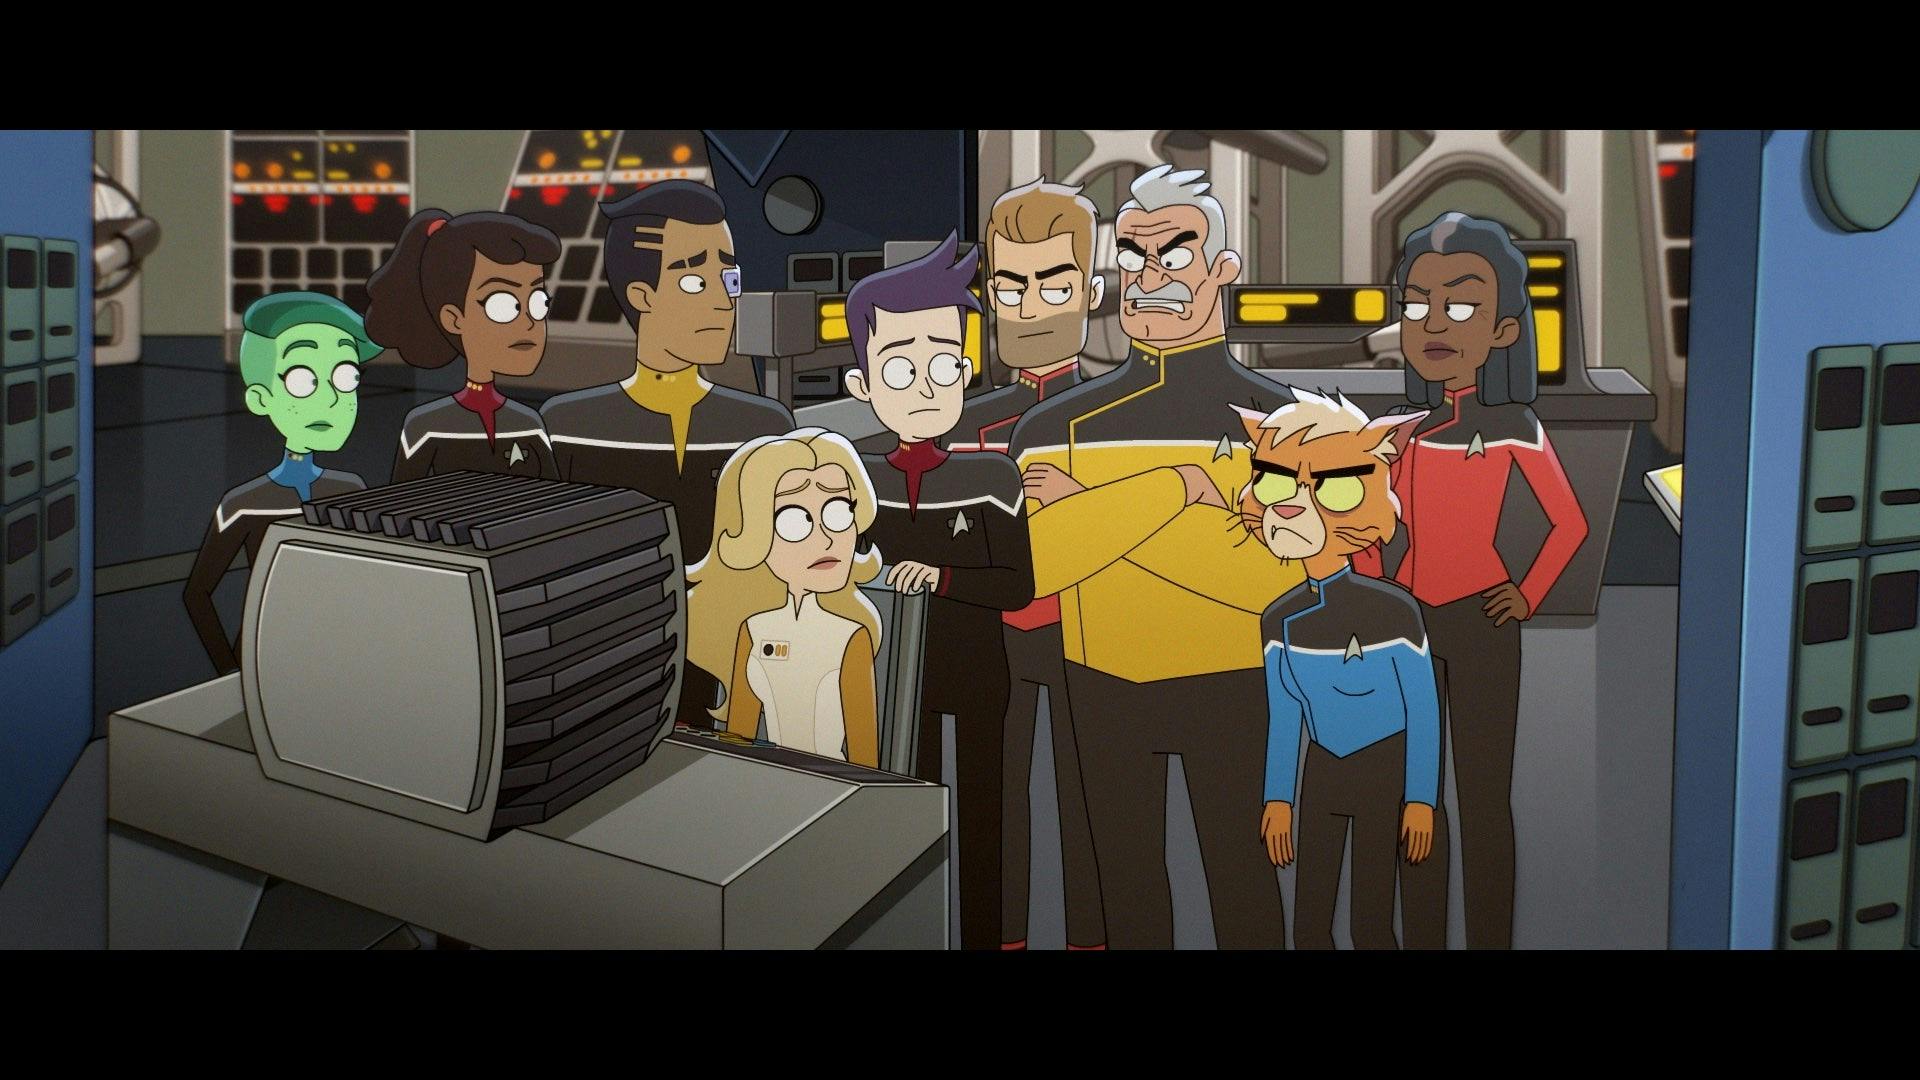 The ensigns and bridge crew gather around a computer.